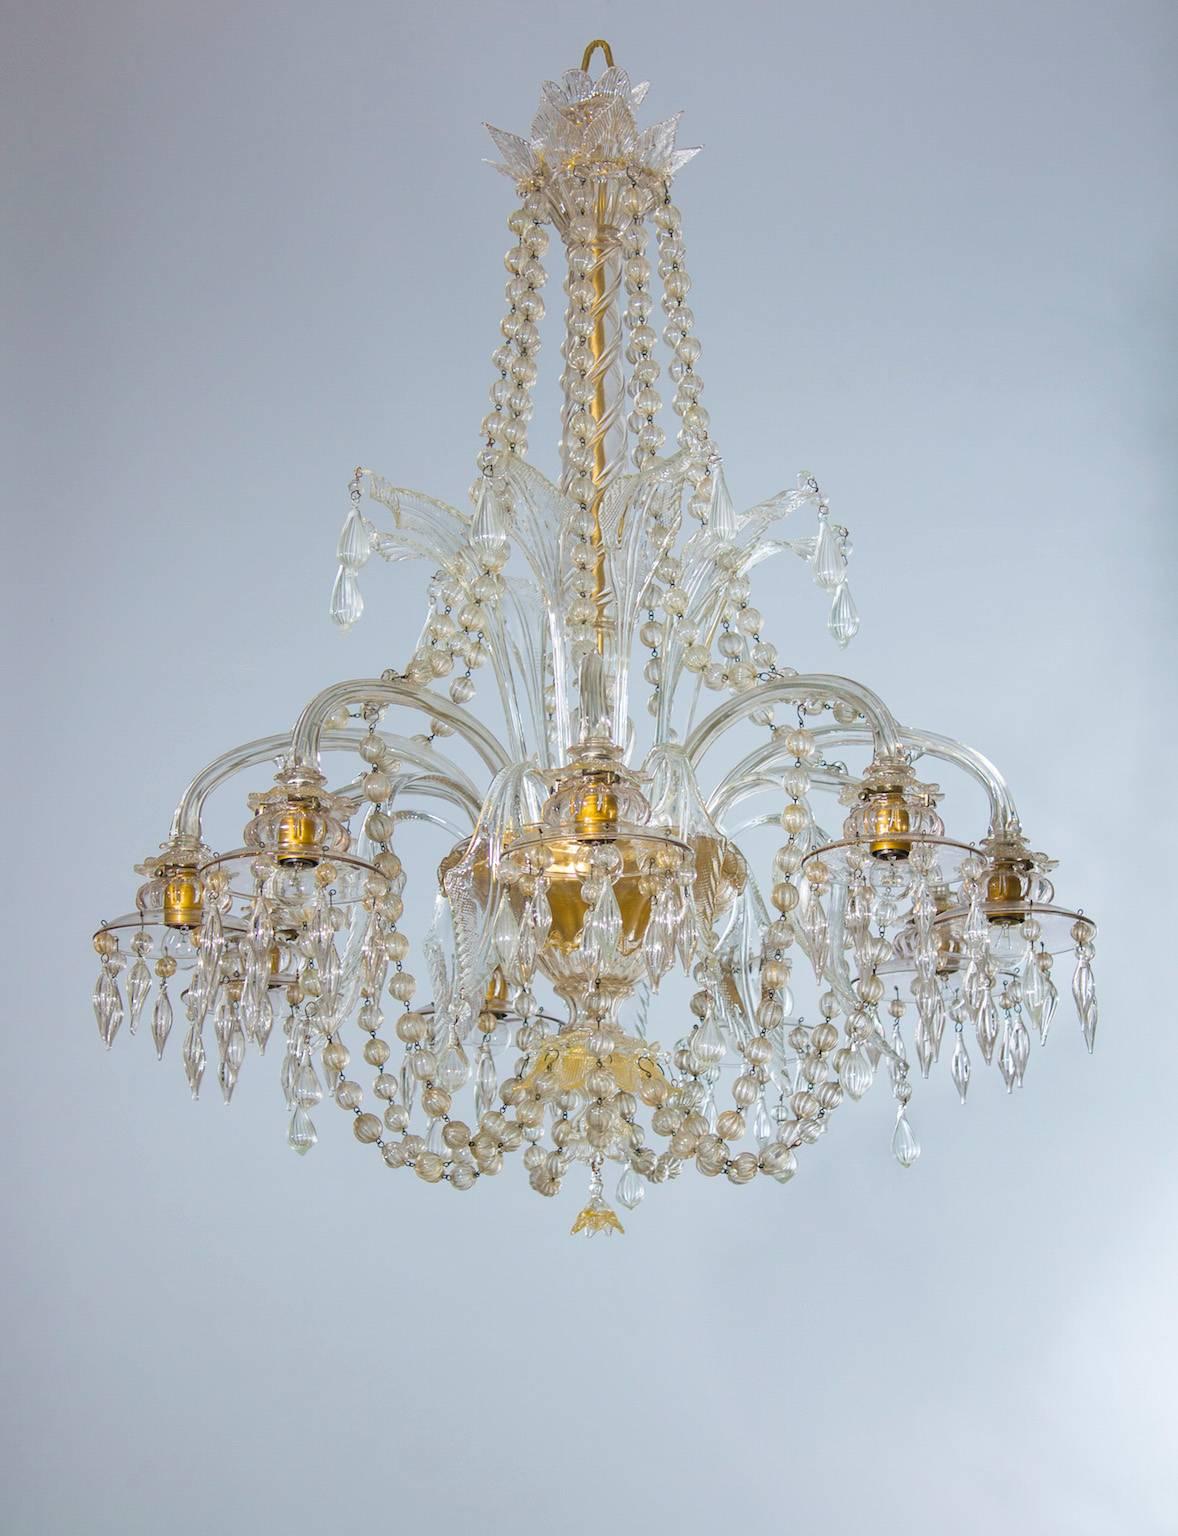 Murano Glass Chandelier with Hanging clear Glass Sphere and Strings Italy 1950s.
Entirely handcrafted in the 1950s in Murano, the Venetian island famous for its unrivaled blown glass tradition, this chandelier is made of 9 clear glass arms, each